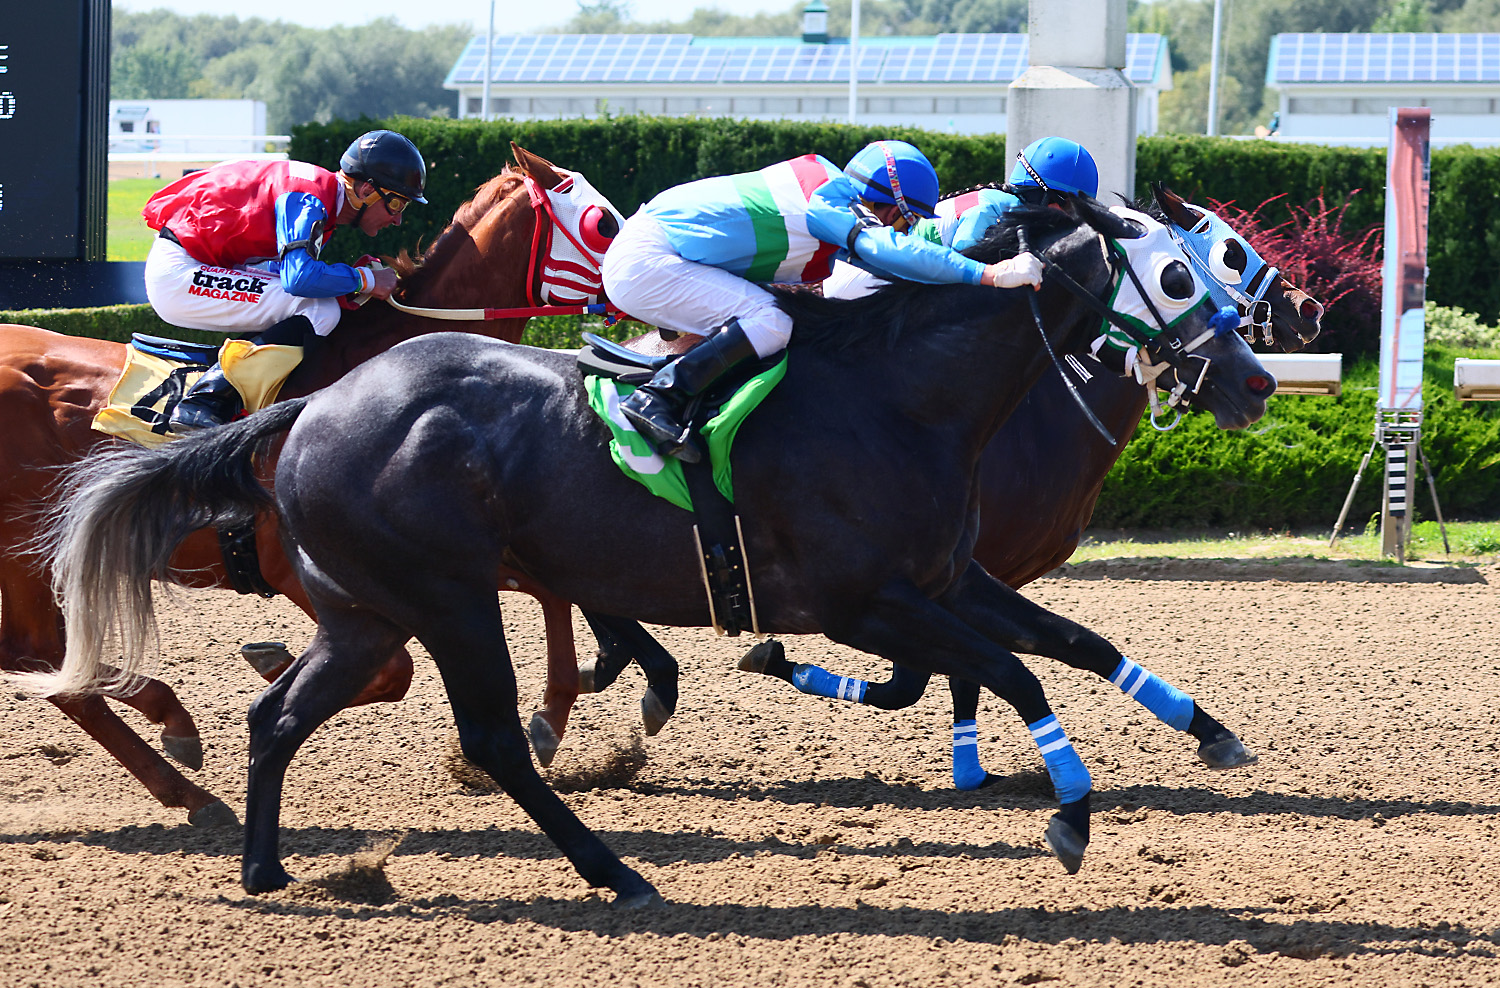 Two horses owned and trained by James Bogar landed in a dead-heat  for win in race 2. Jezzabella (inside) and Bogie Wheels could not be separated  by the photo finish camera